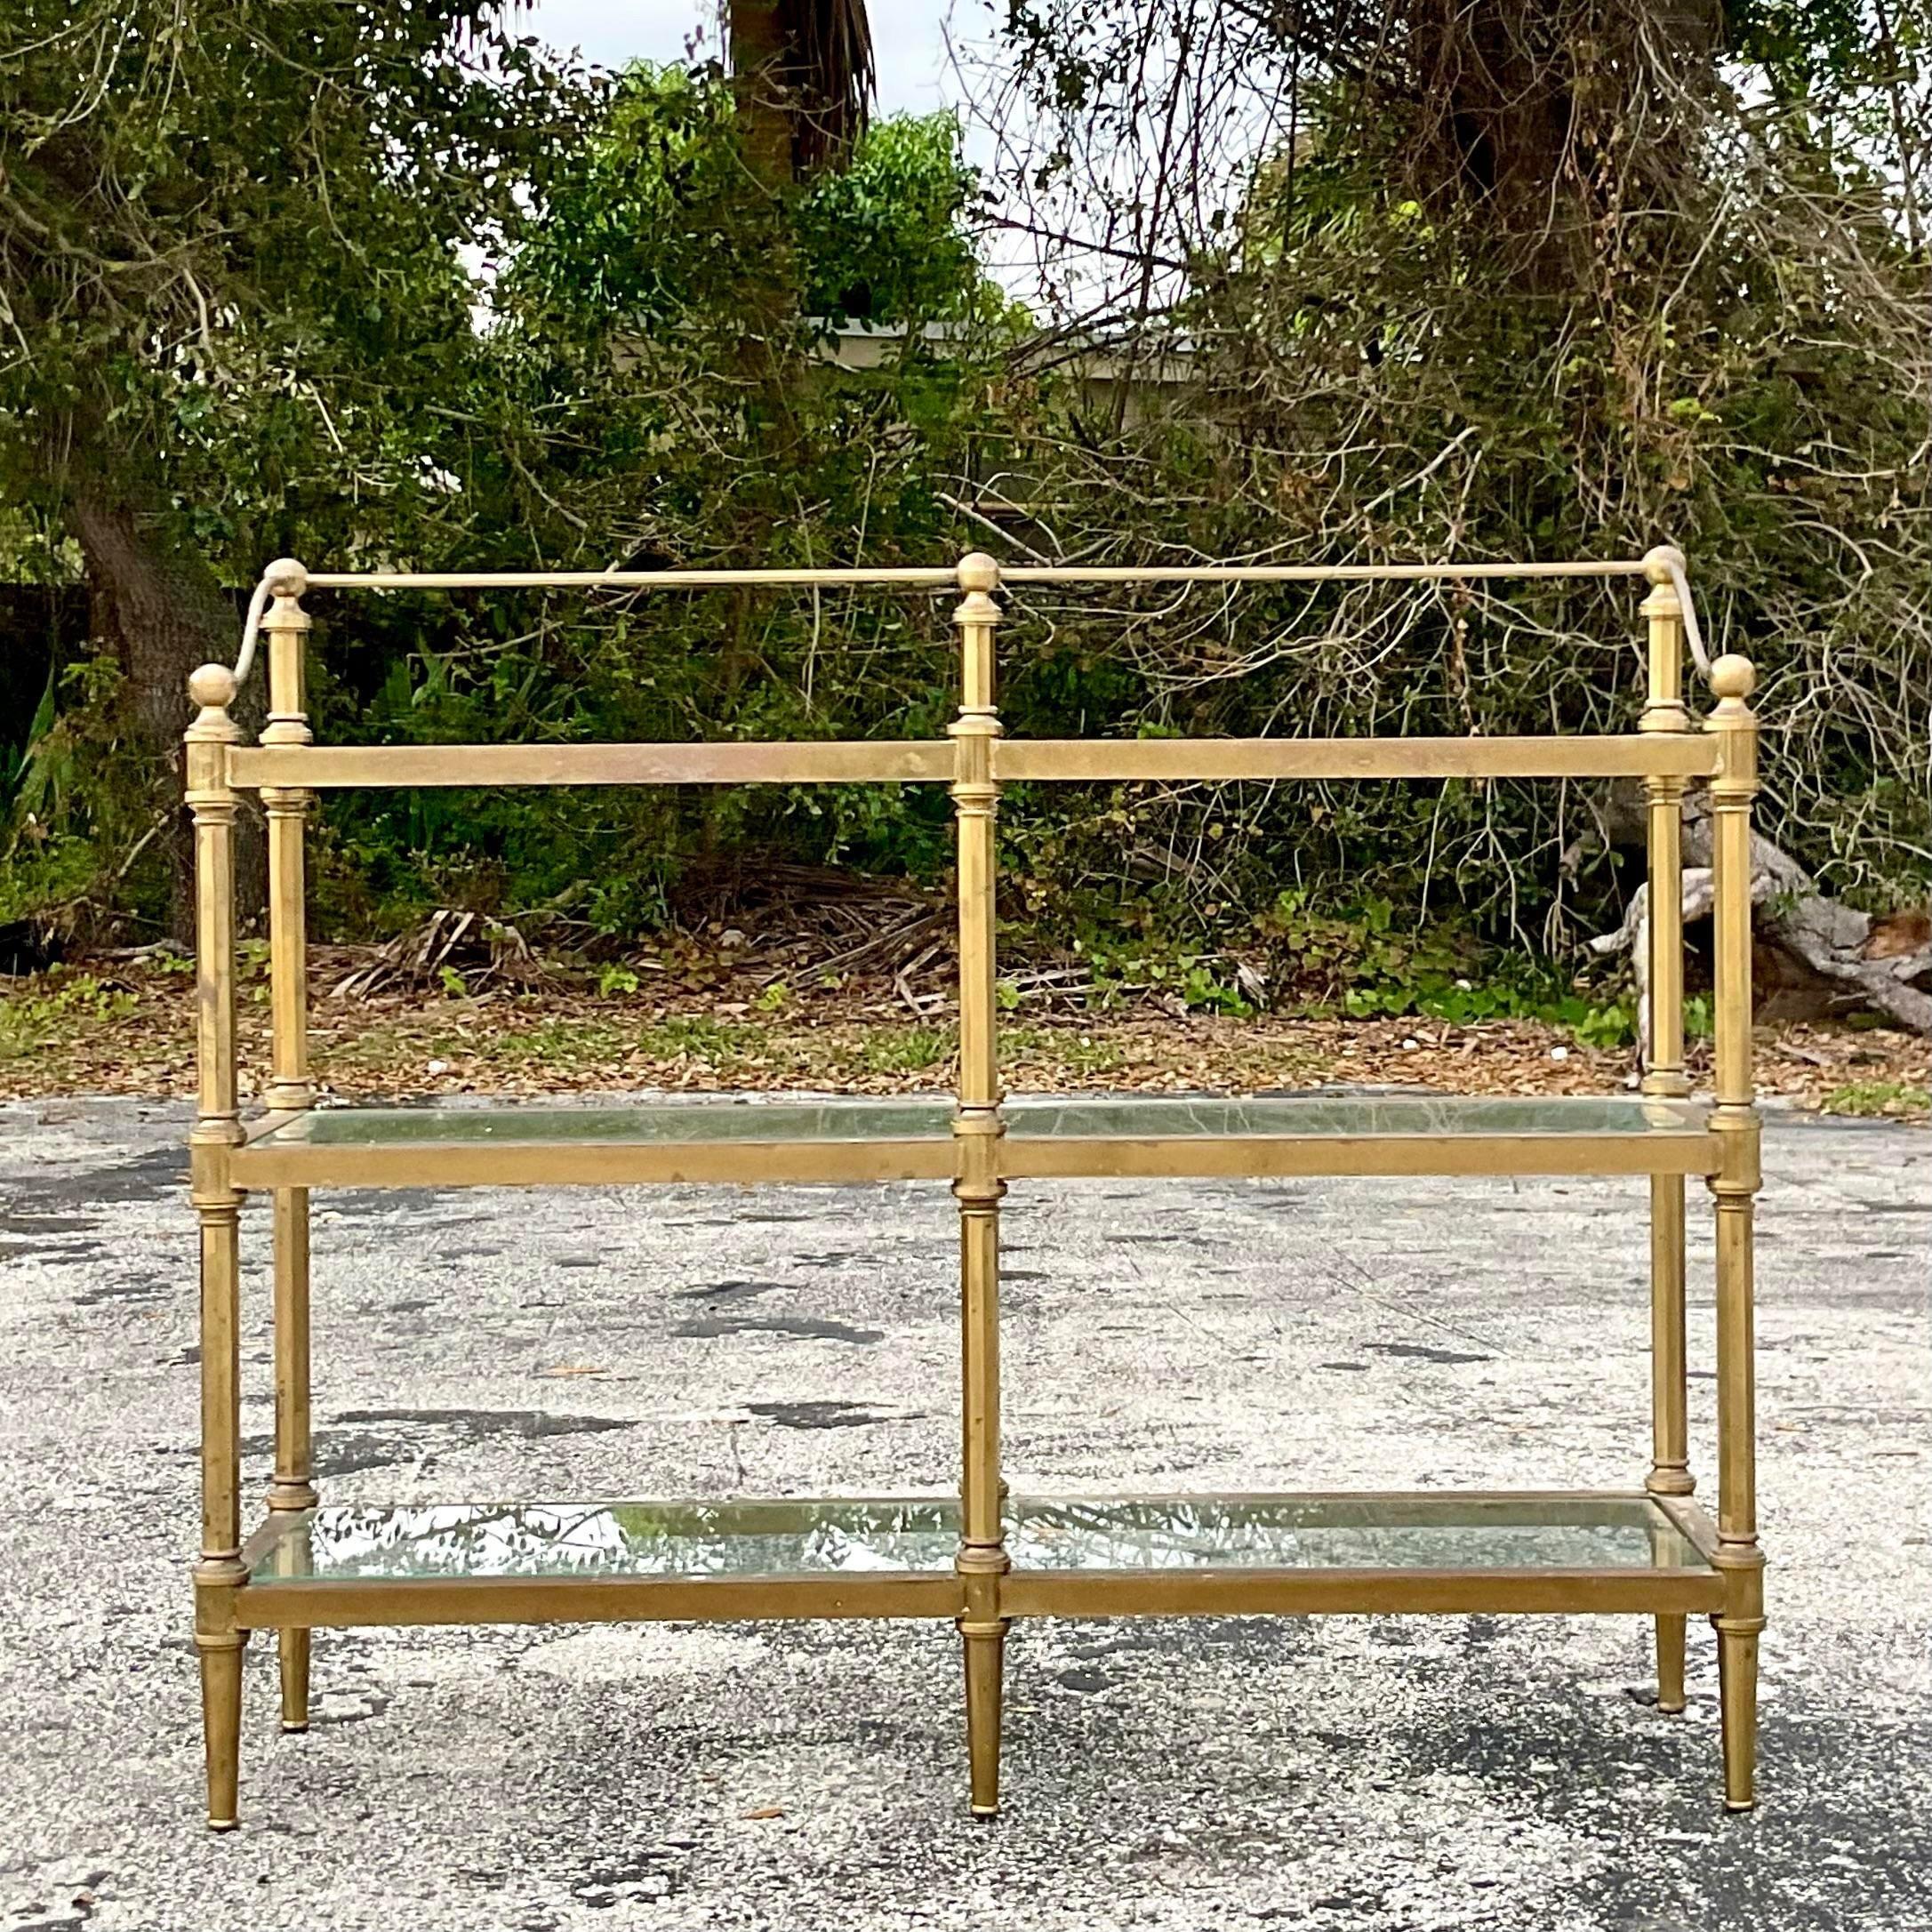 A brilliant vintage Regency low etagere. A chic brass frame with inset glass shelves. Perfect as an etagere, but also would make the most gorgeous dry bar. You decide. Acquired from a Palm Beach estate.